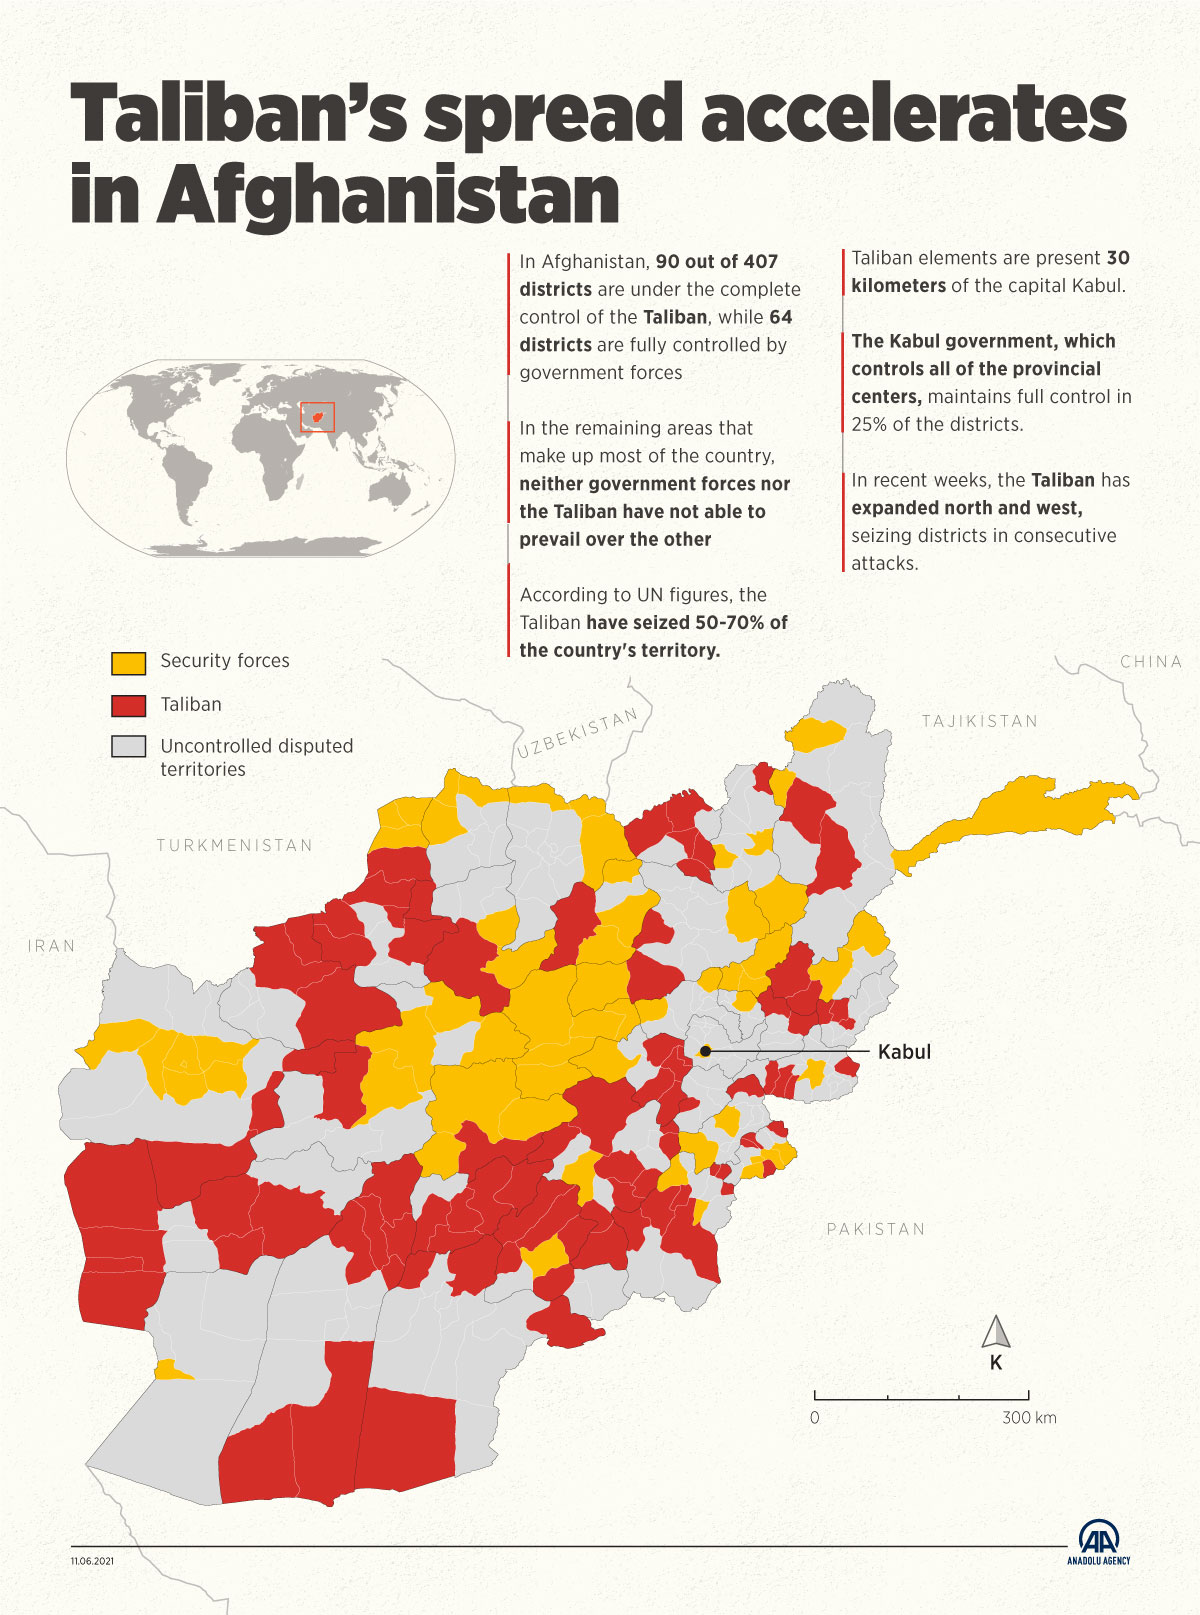 Taliban’s spread accelerates in Afghanistan